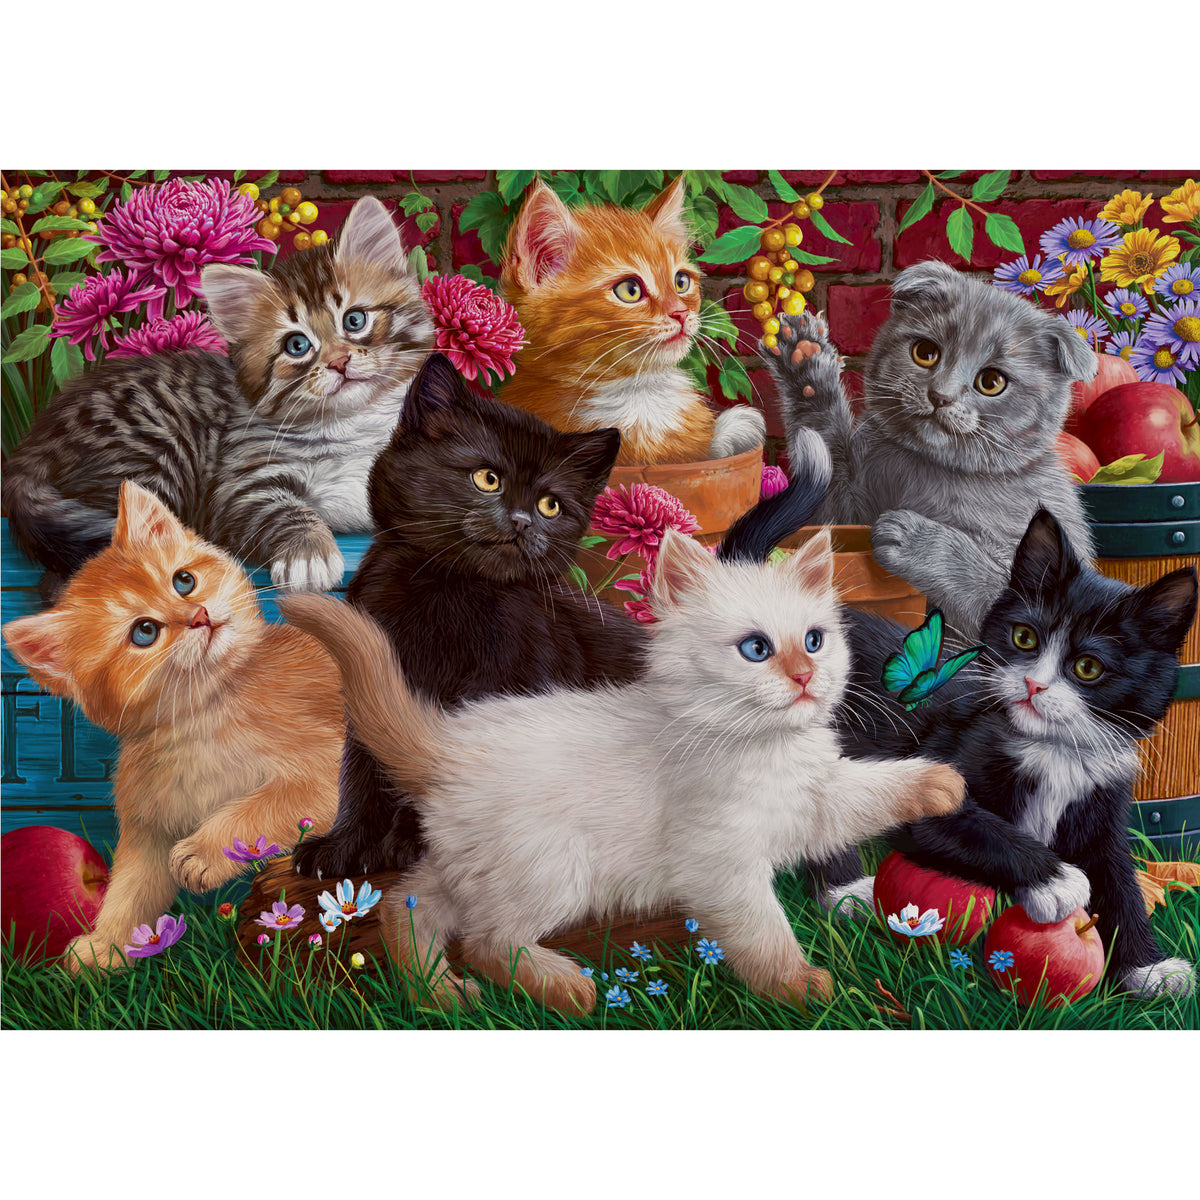 Kittens at Play Panel 45x60"